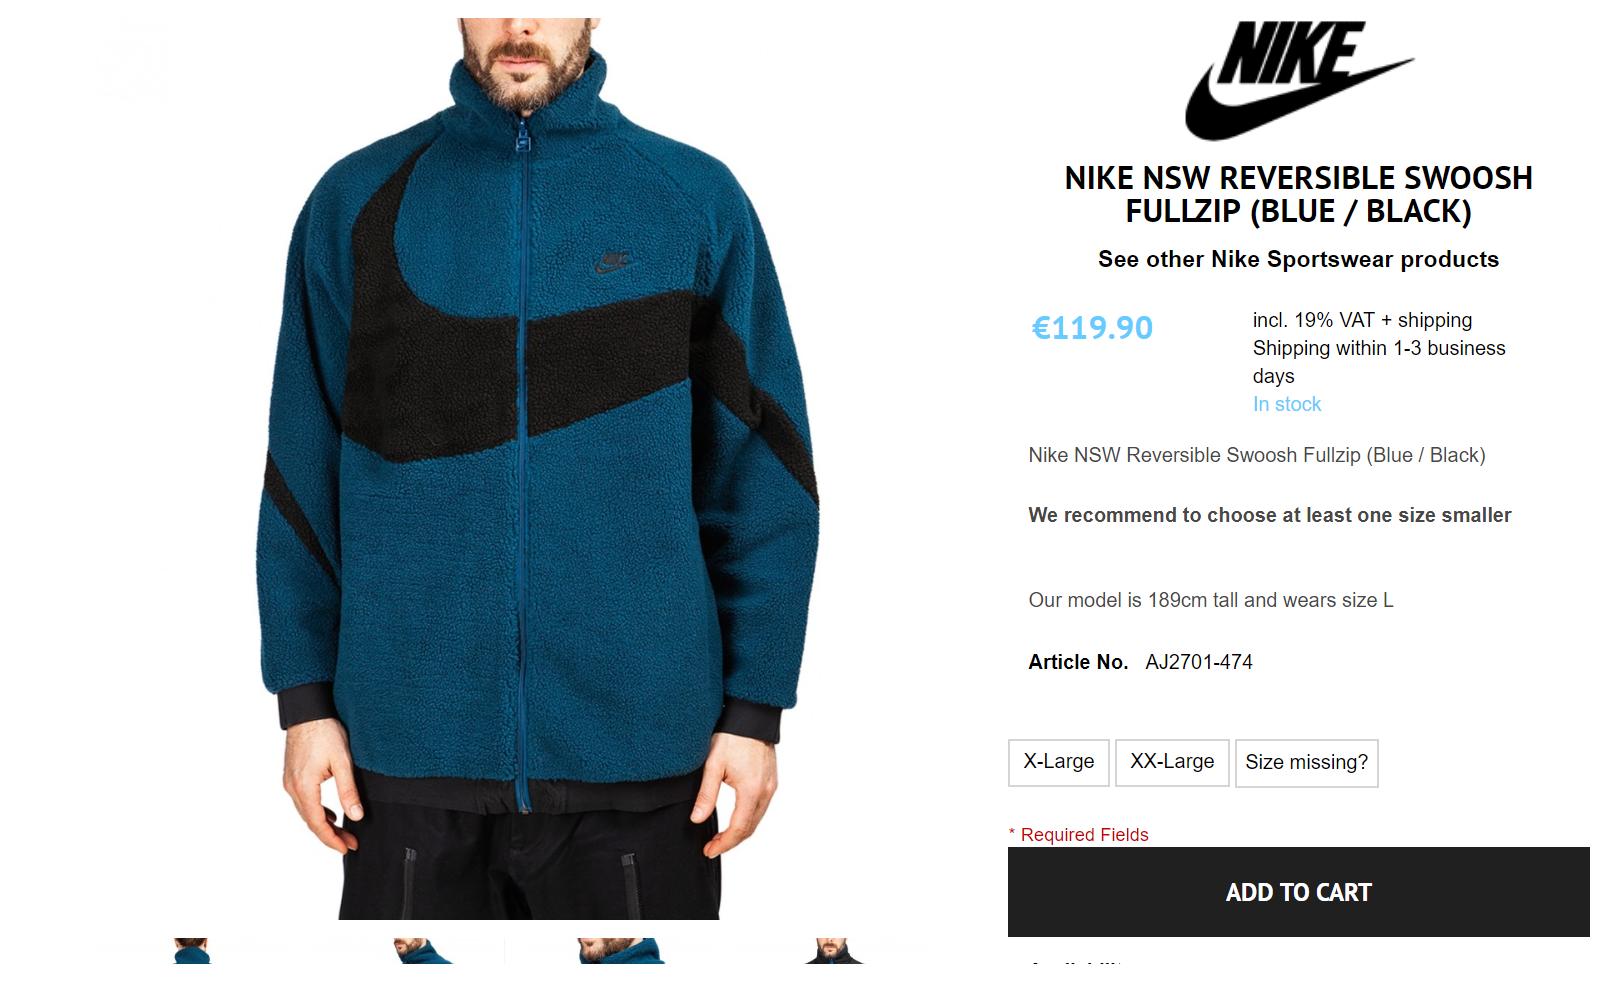 MoreSneakers.com on Twitter: "AD : Nike Reversible Swoosh Full Zip Jacket Force' Big sizes only with 30% OFF Use code 10YRS-CLOTHES =&gt;https://t.co/wgfEAAeoS0 https://t.co/oeJy6PRqvw" / Twitter